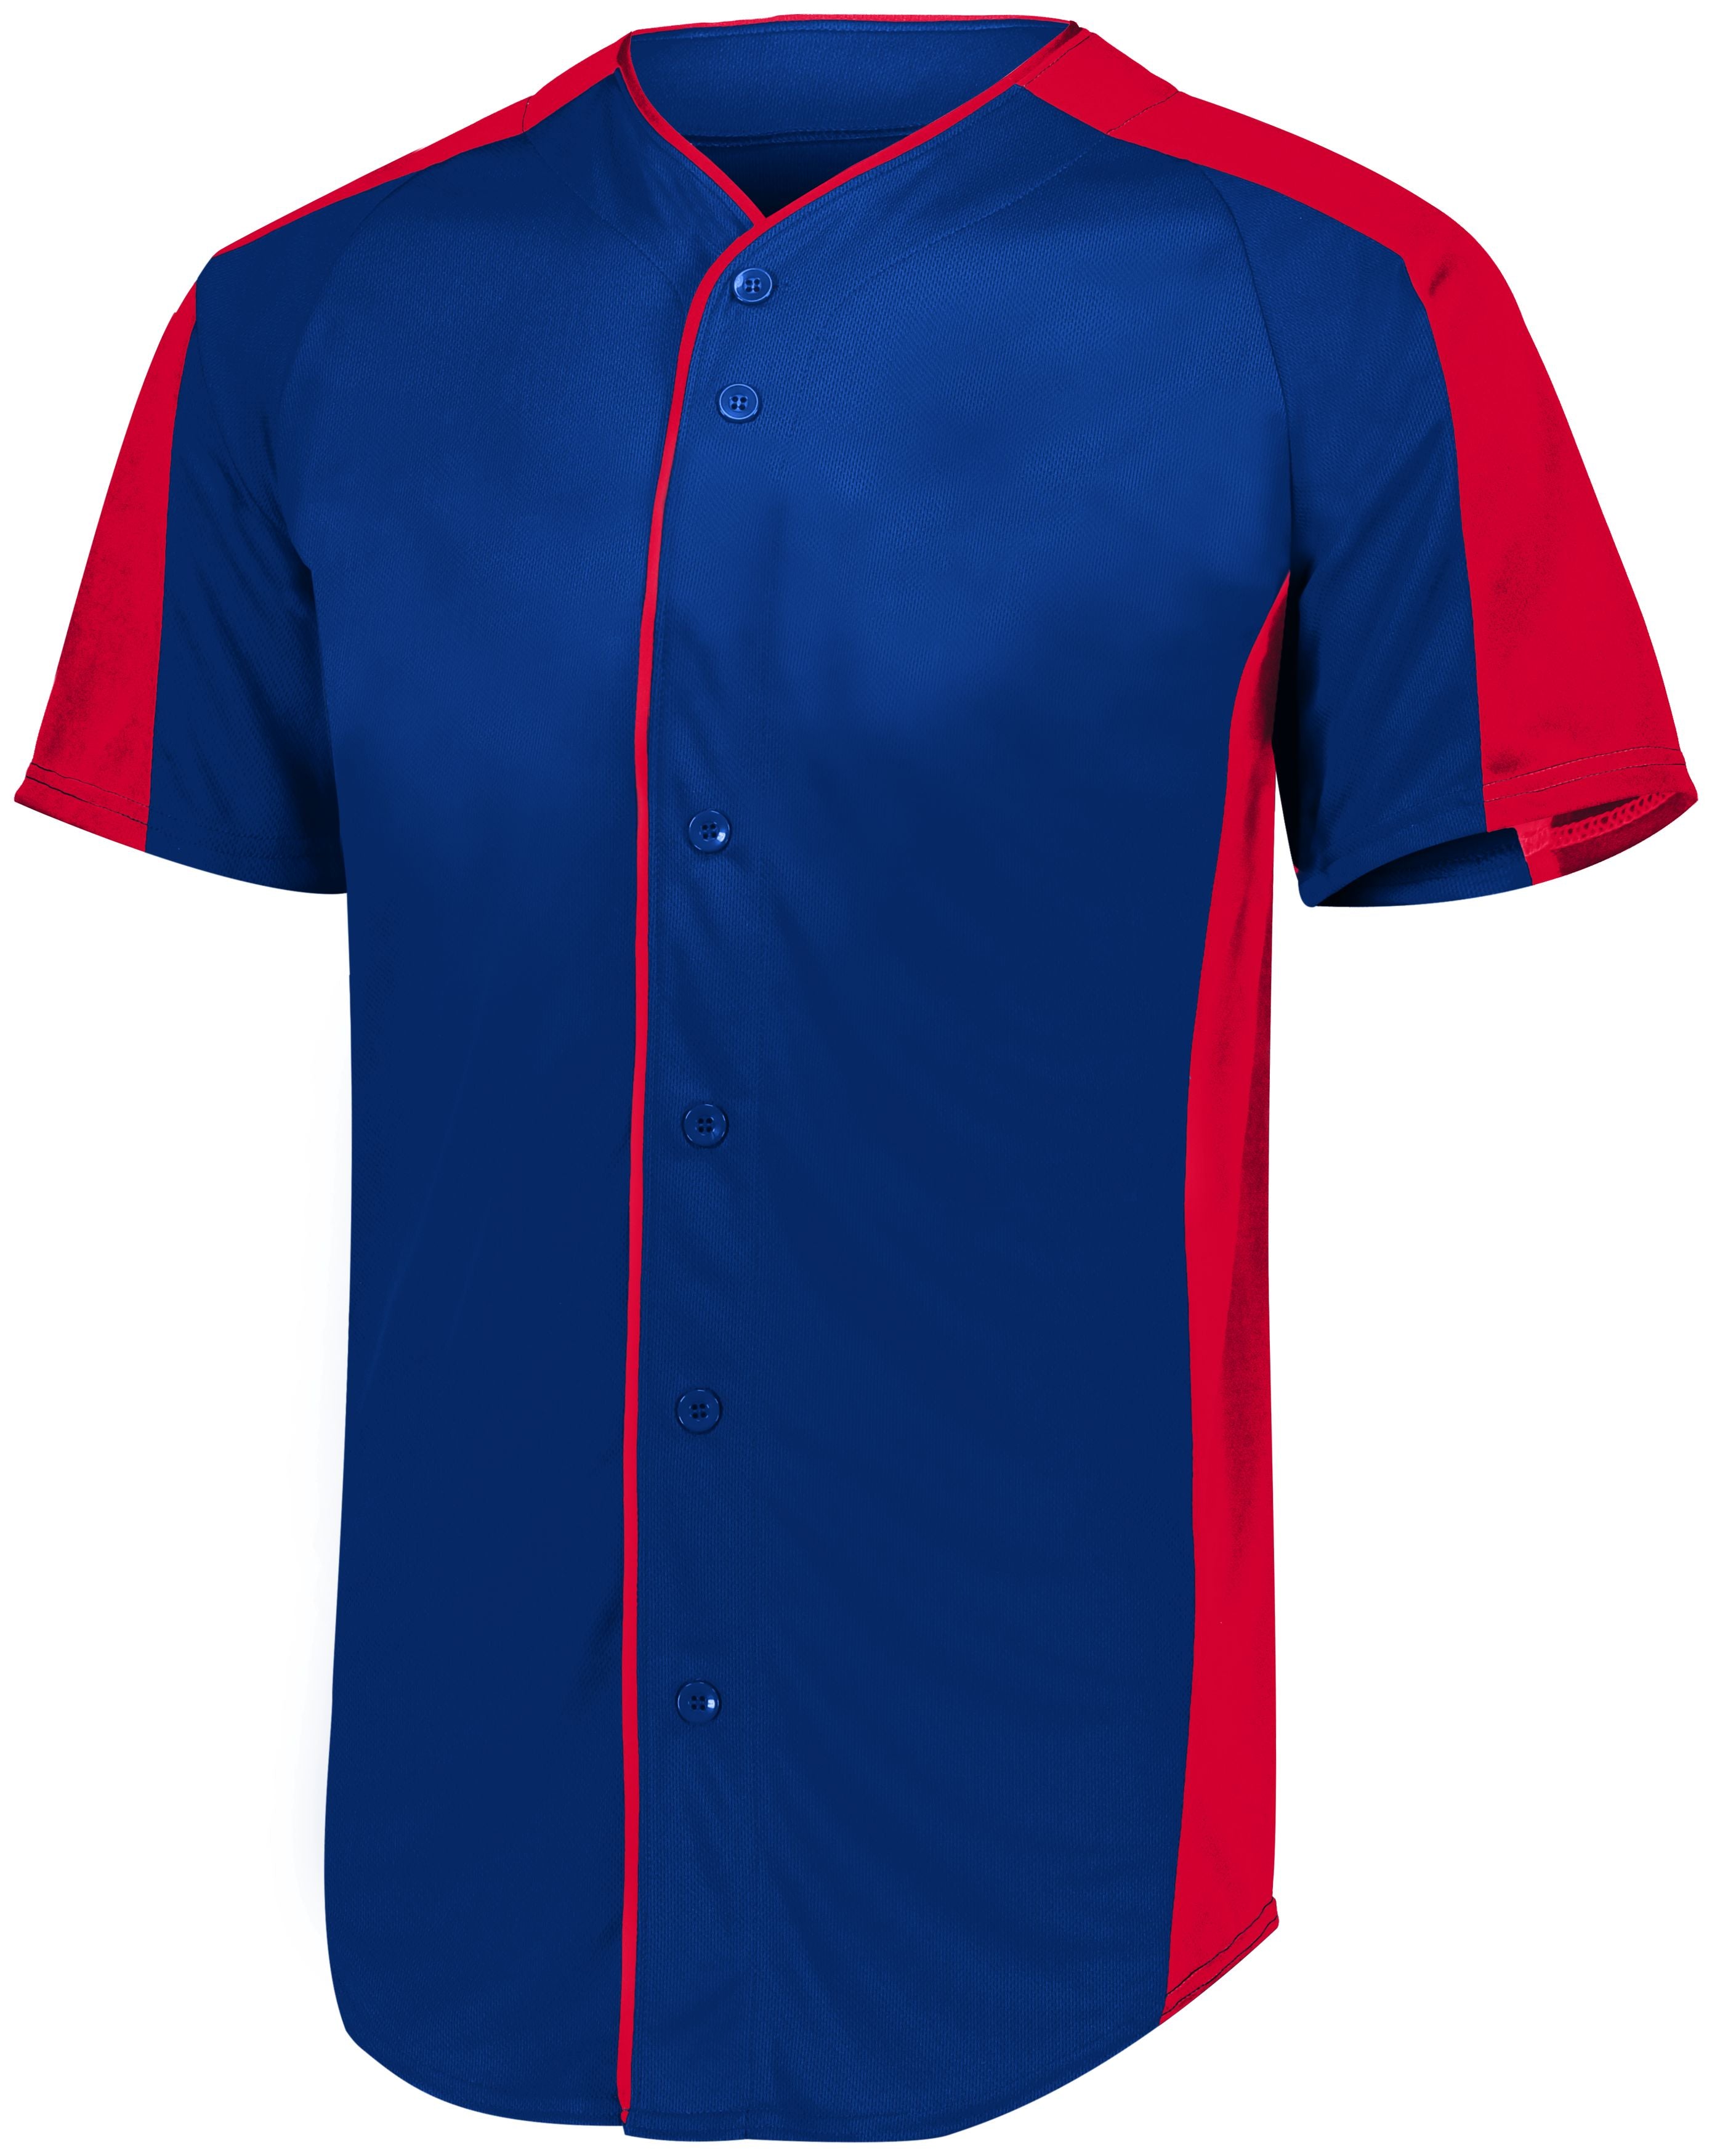 Augusta Sportswear Youth Full-Button Baseball Jersey in Navy/Red  -Part of the Youth, Youth-Jersey, Augusta-Products, Baseball, Shirts, All-Sports, All-Sports-1 product lines at KanaleyCreations.com